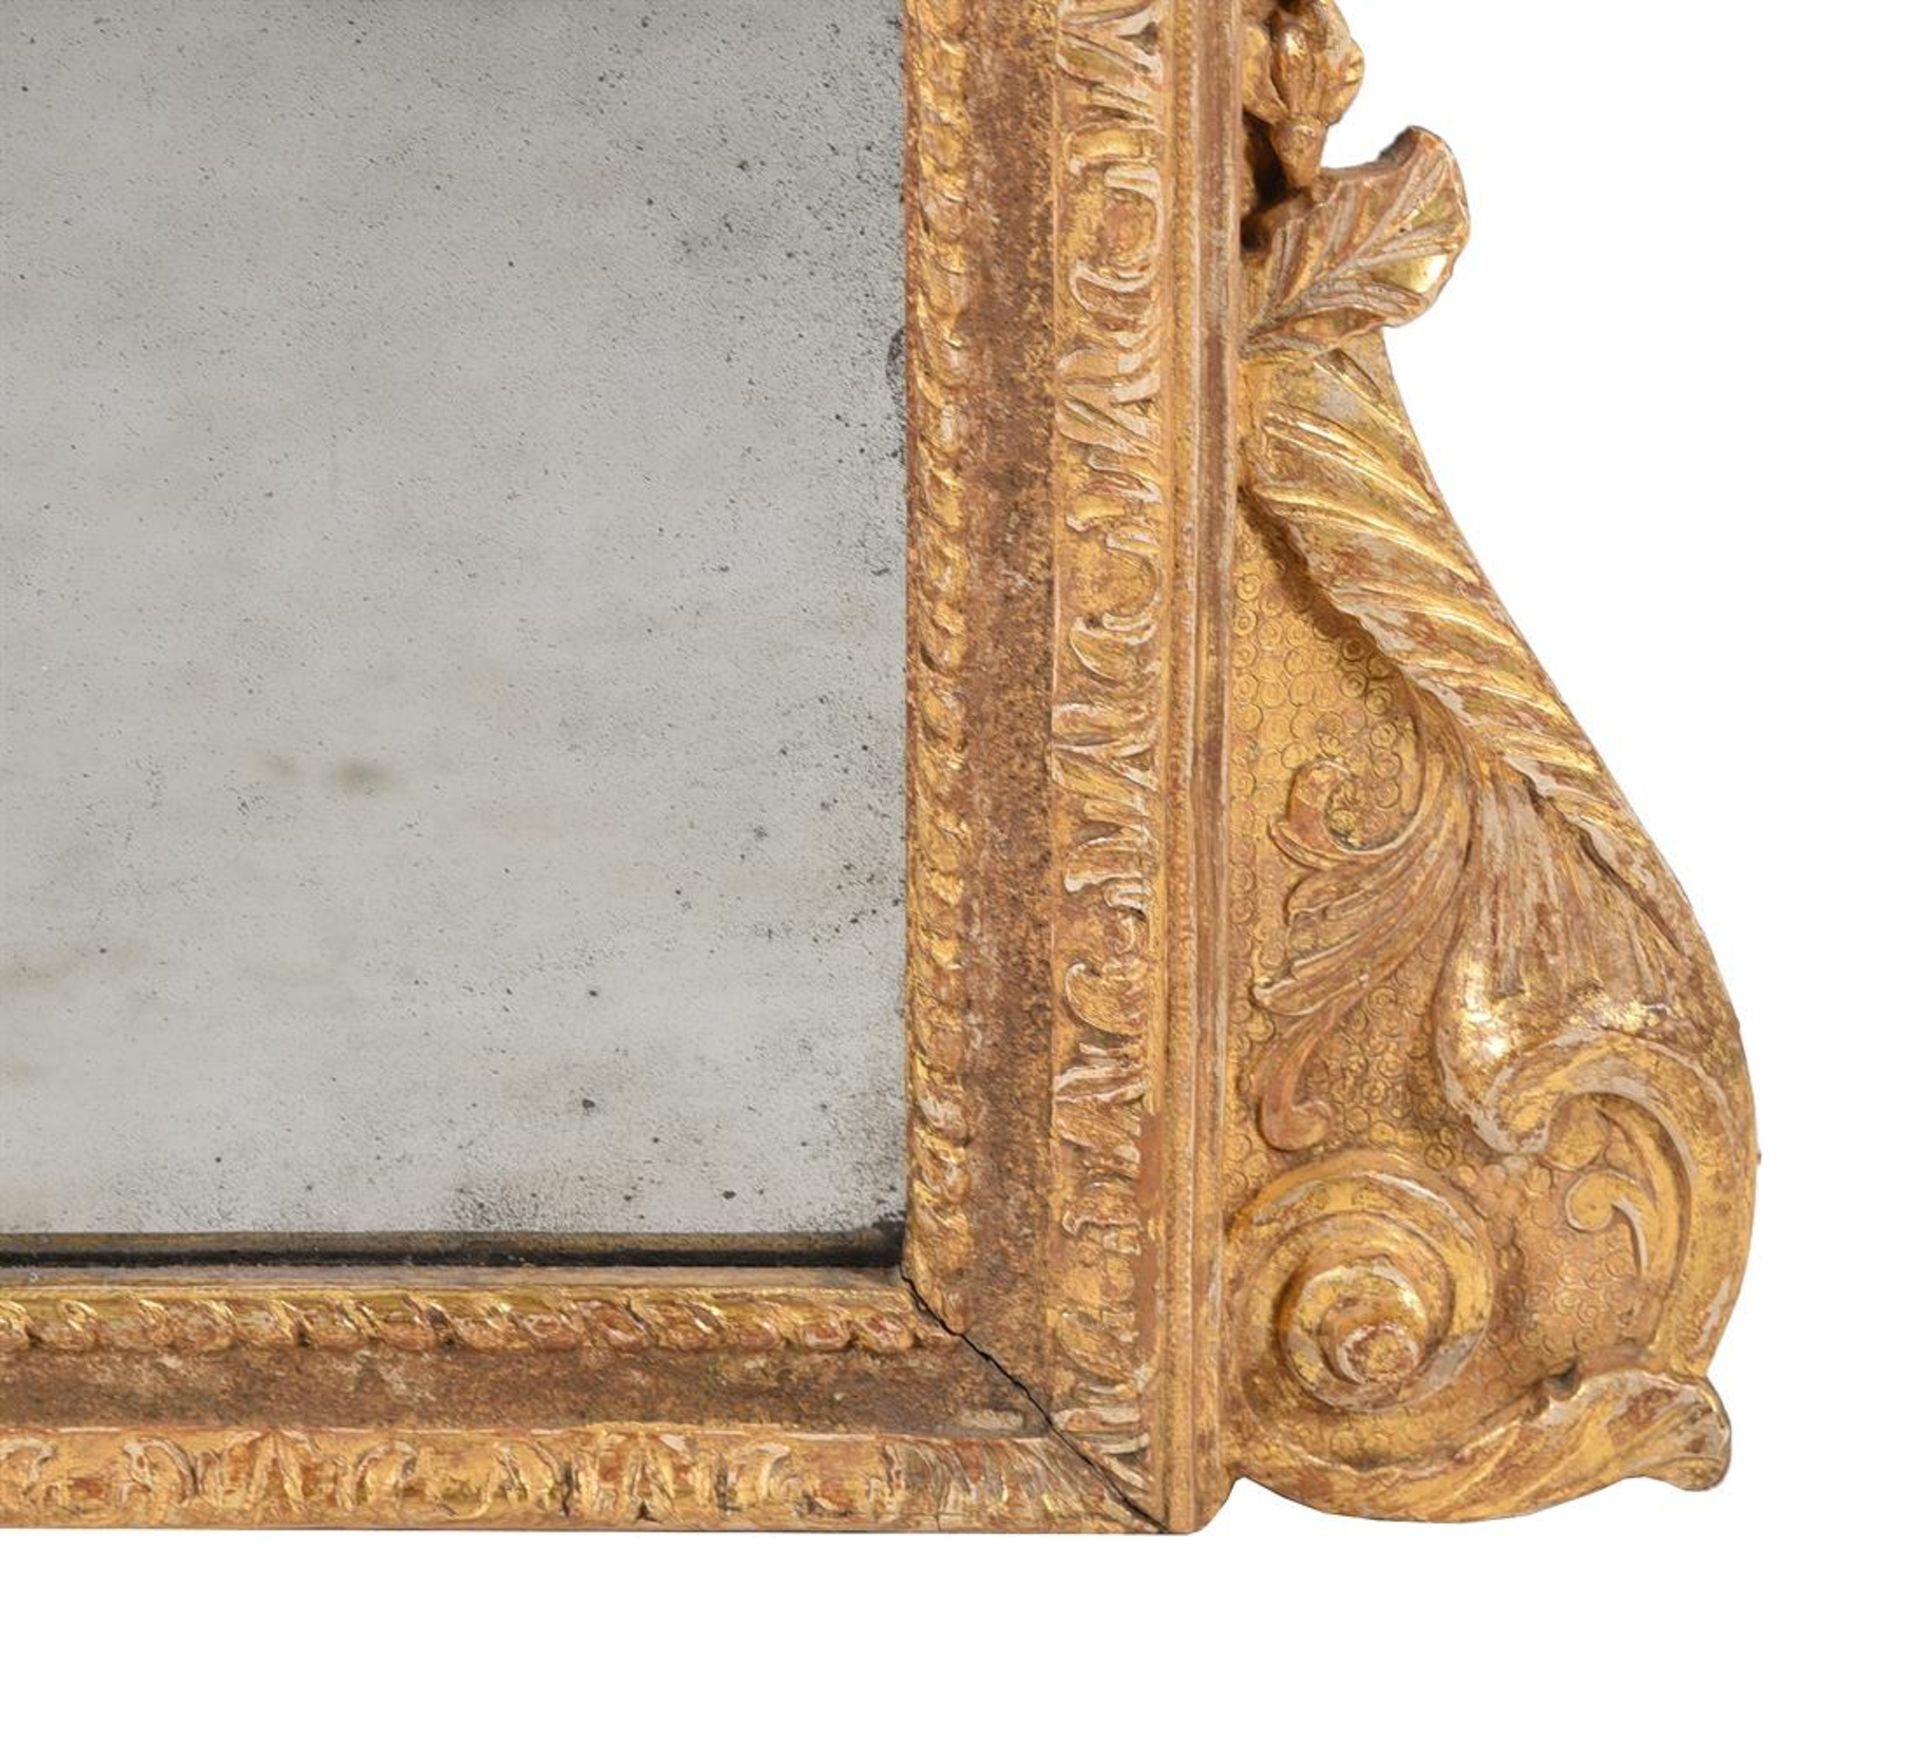 A FINE GEORGE I GILTWOOD MIRROR, IN THE MANNER OF JOHN BELCHIER, CIRCA 1720 - Image 4 of 5